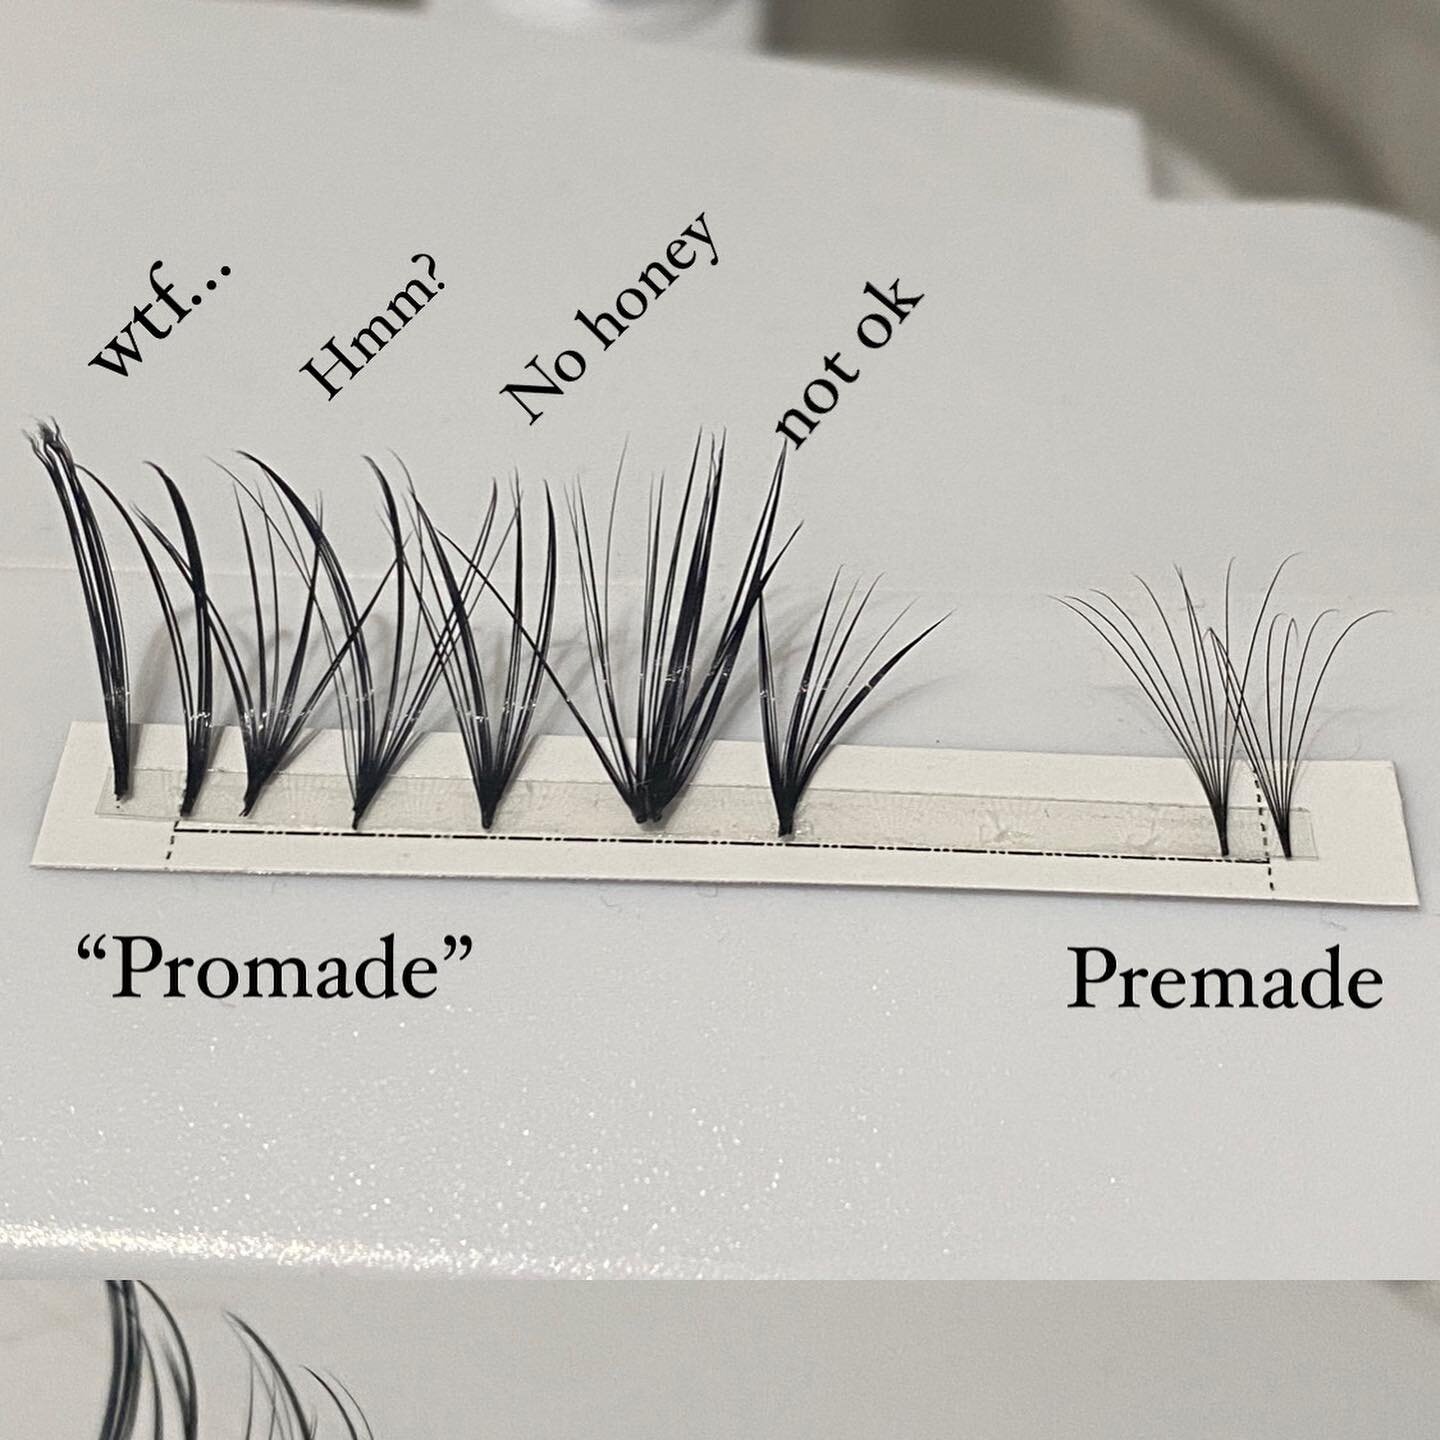 LET ME JUST SAY - if you are a lash artist that talks shit about premade fans, yet your &ldquo;Promade&rdquo; fans look like this....?? HONEY 👏🏽 Please switch to premade&lsquo;s &amp; humble yourself! 

there are so many benefits when it comes to p